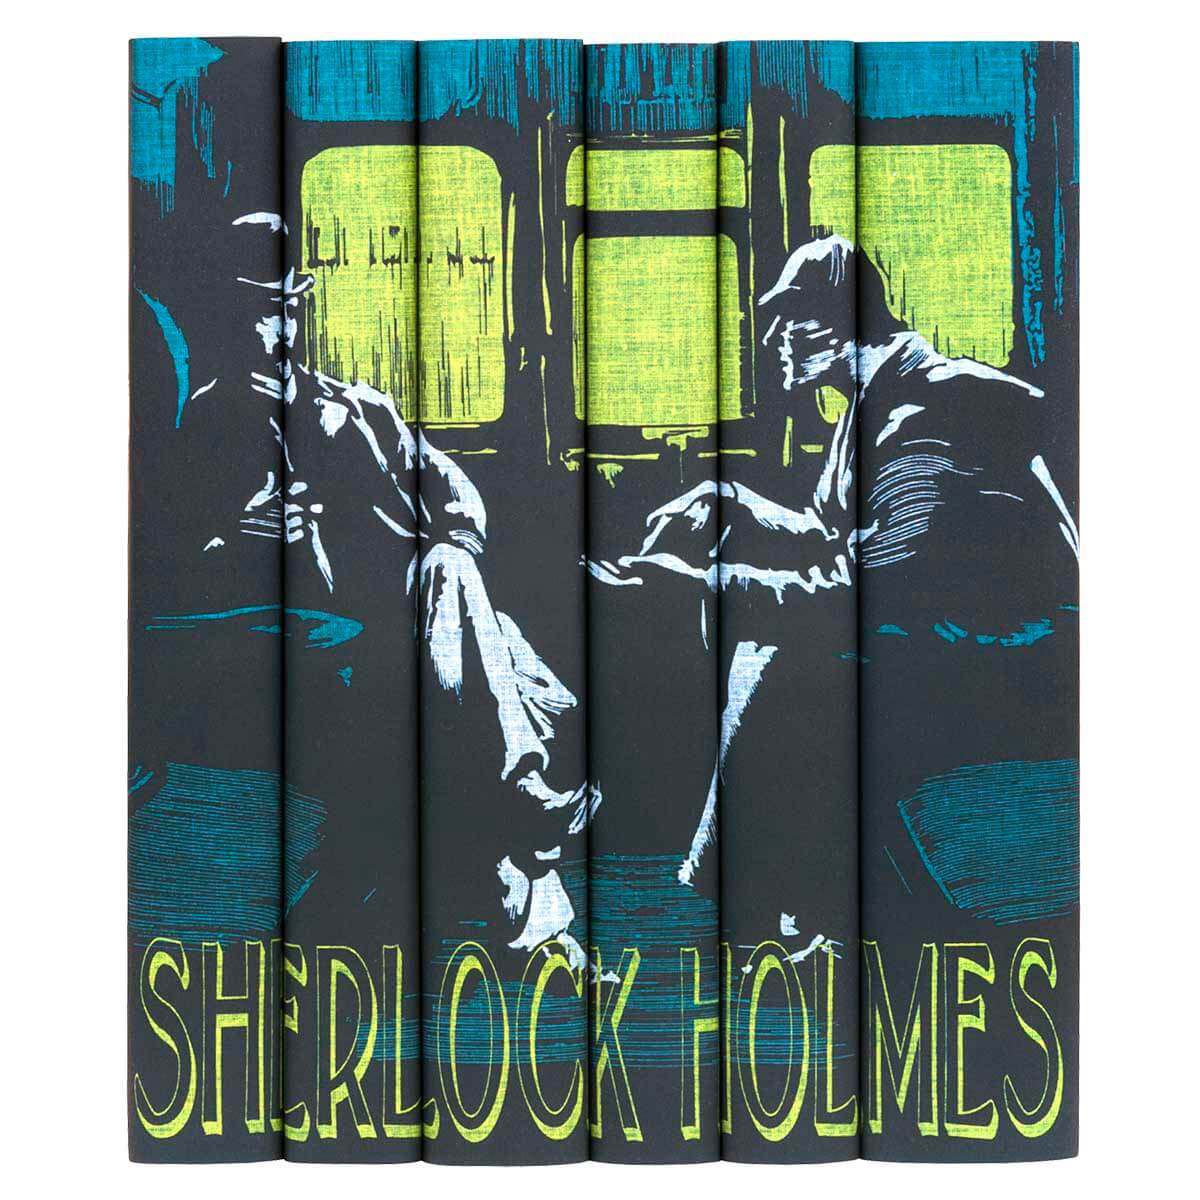 Discover the allure for yourself with this made-to-order (MTO) set of 6 beautifully bound, pocket-sized Holmes books published by Collector’s Library. They come wrapped in custom-printed Juniper Books jackets featuring an illustration of Holmes and his partner, Watson.